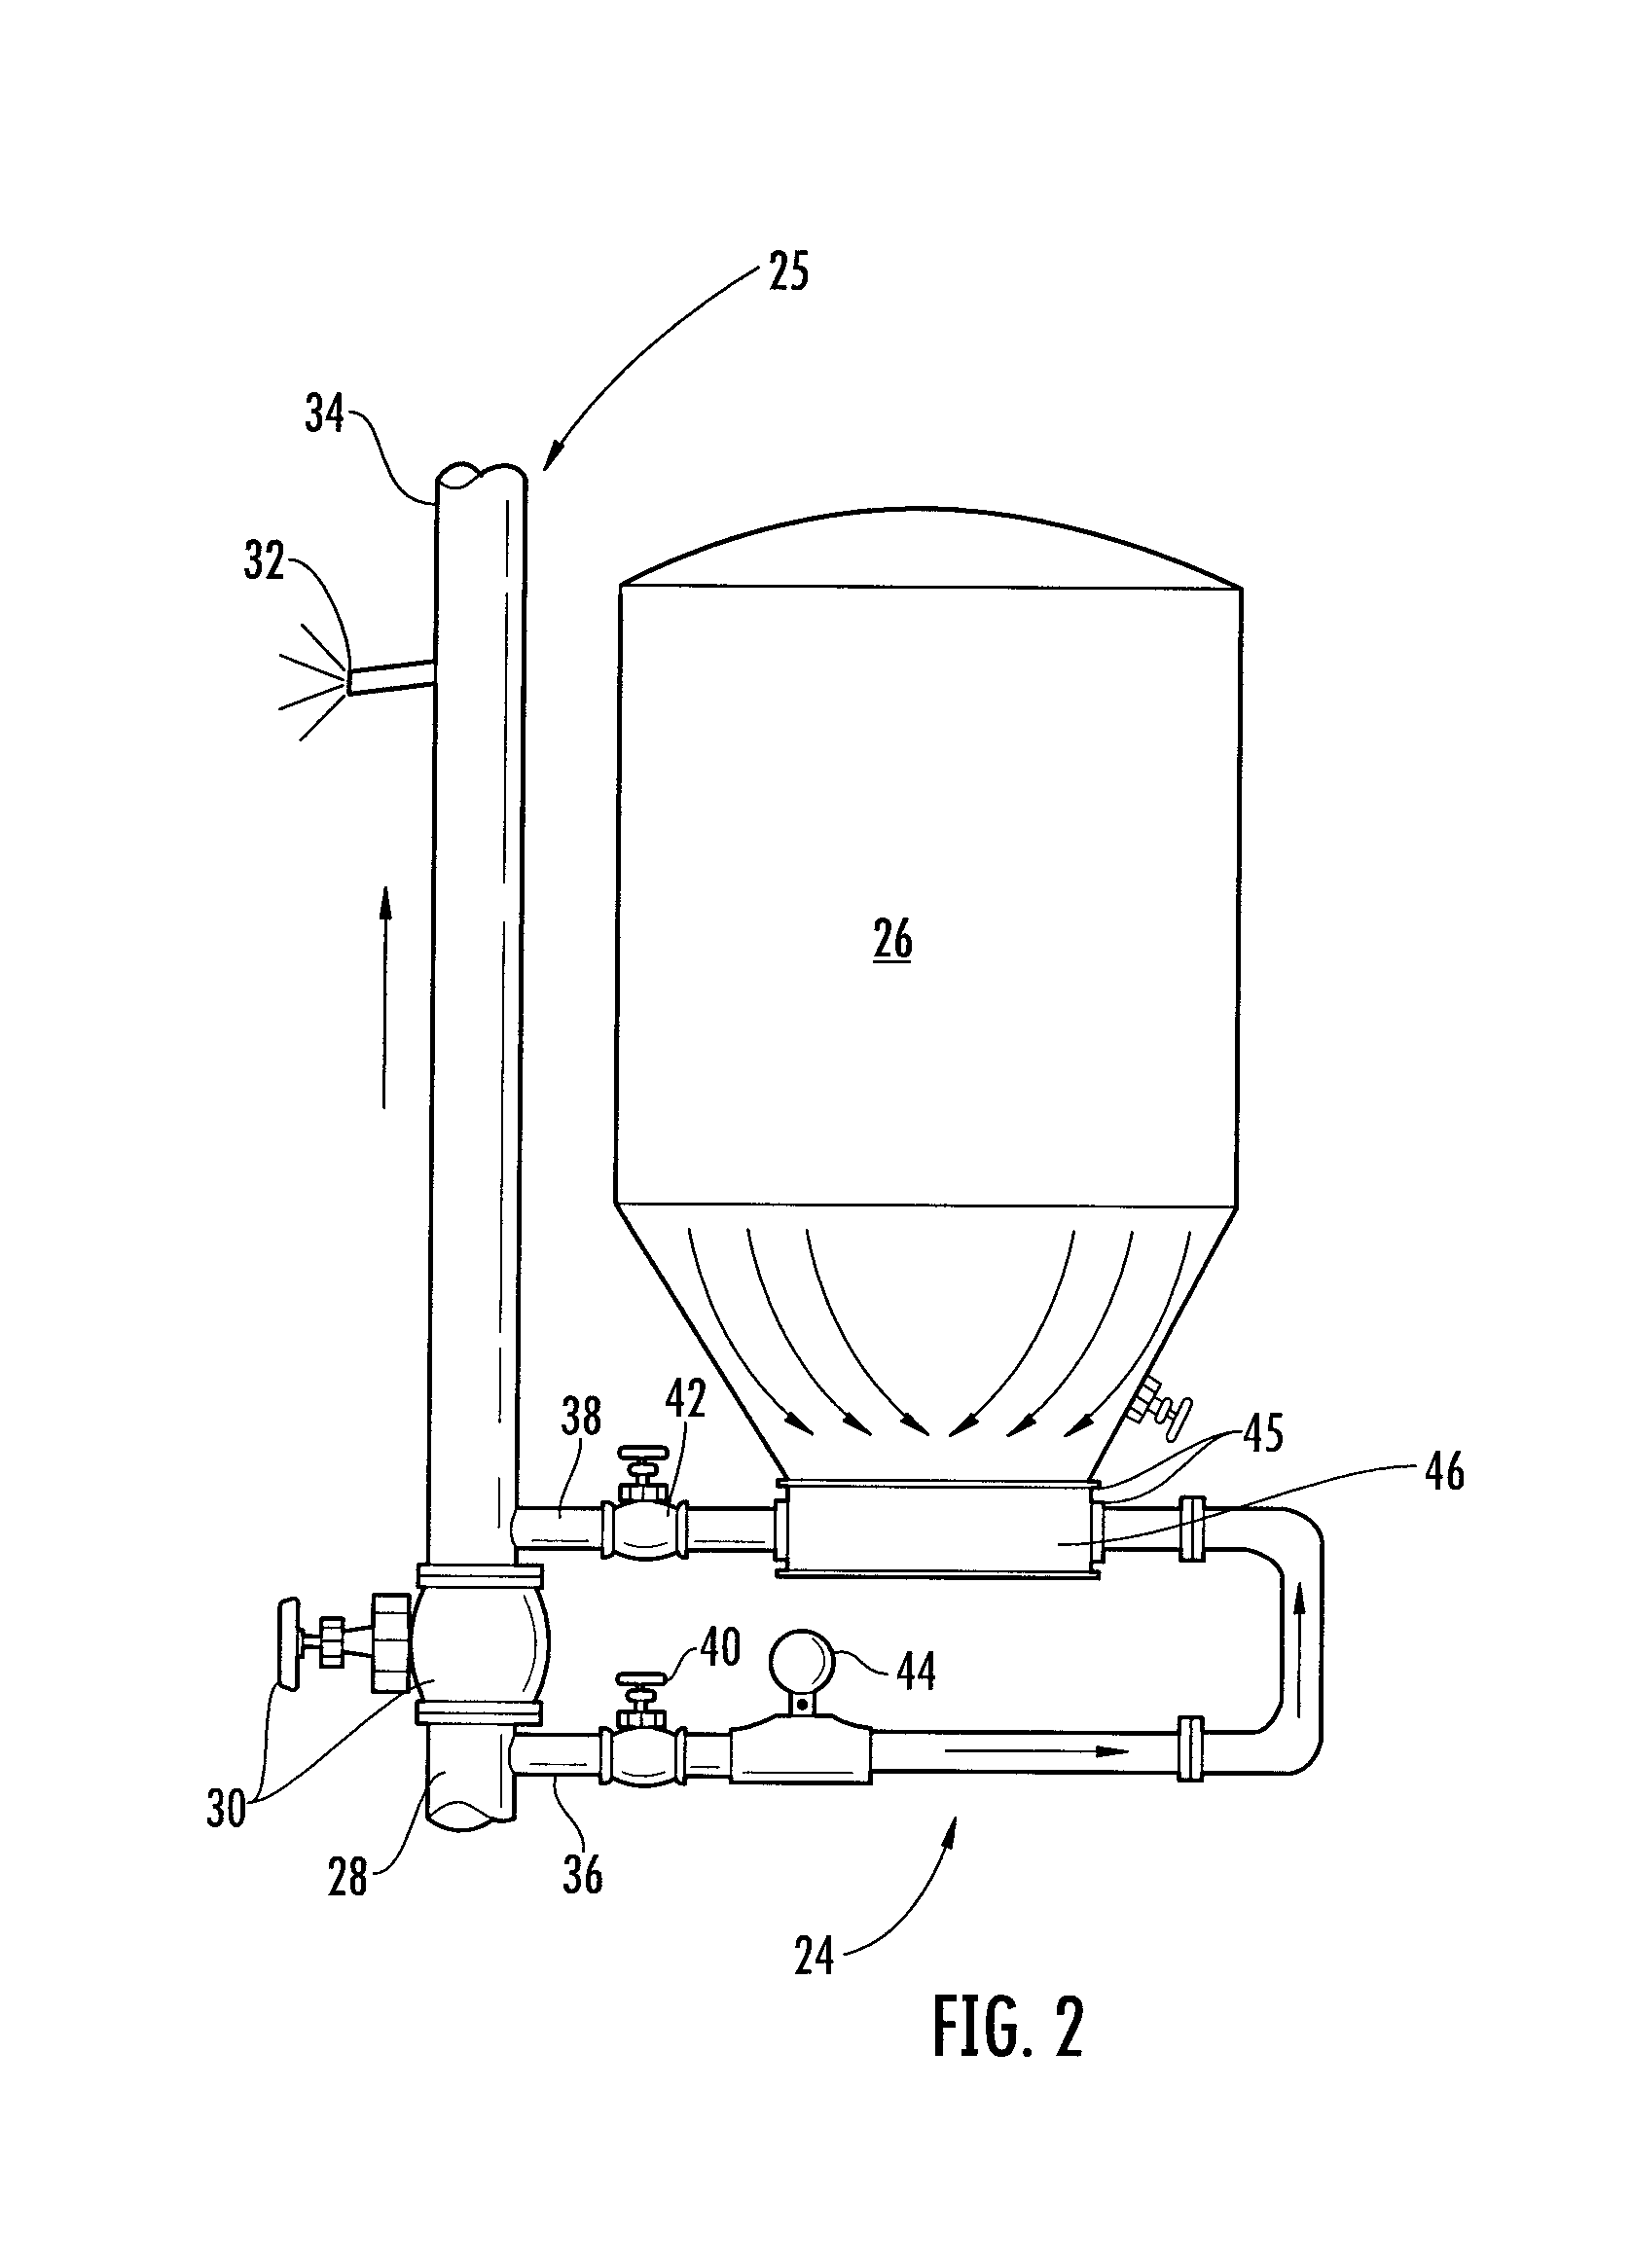 Process and device for fire prevention and extinguishing